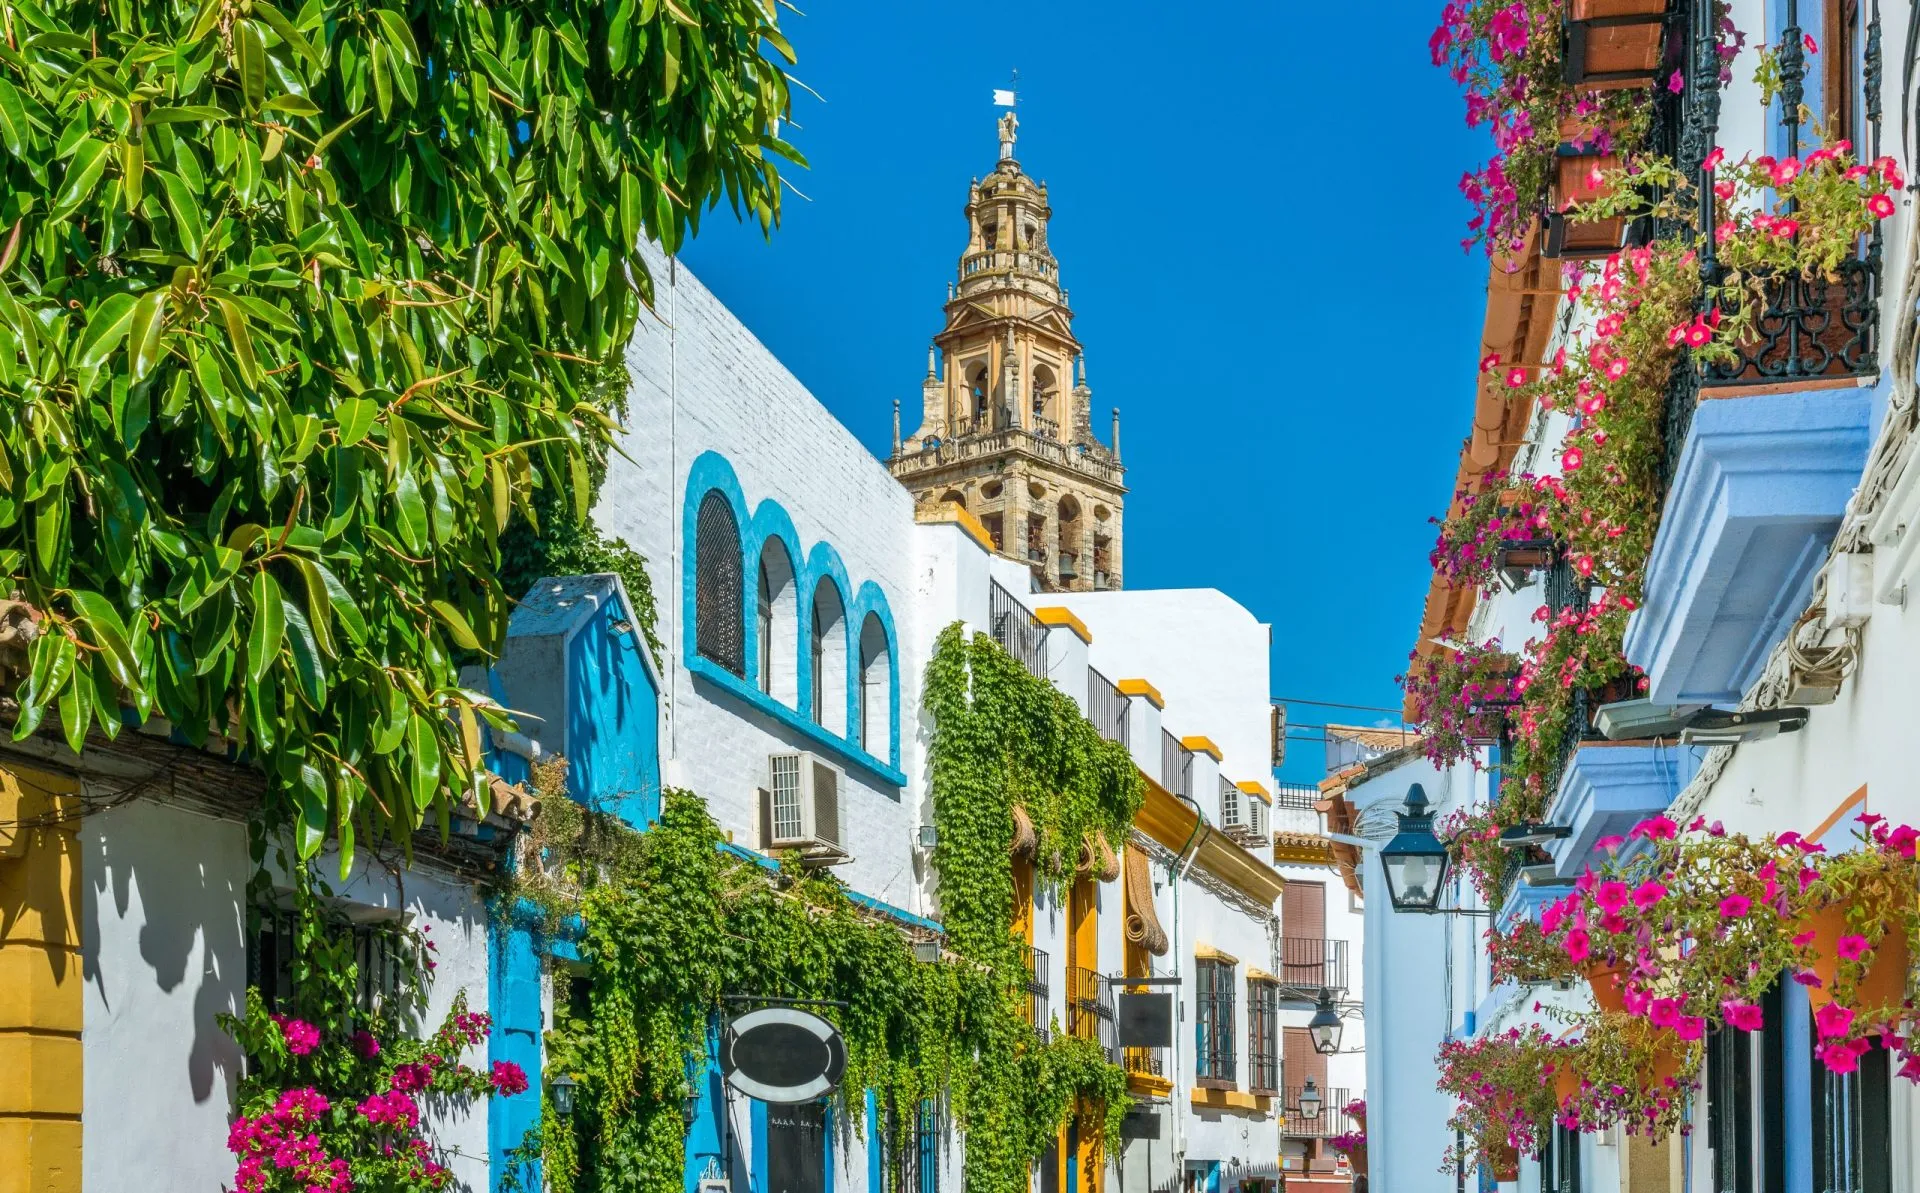 Scenic sight in the picturesque Cordoba jewish quarter with the bell tower of the Mosque Cathedral. Andalusia, Spain.